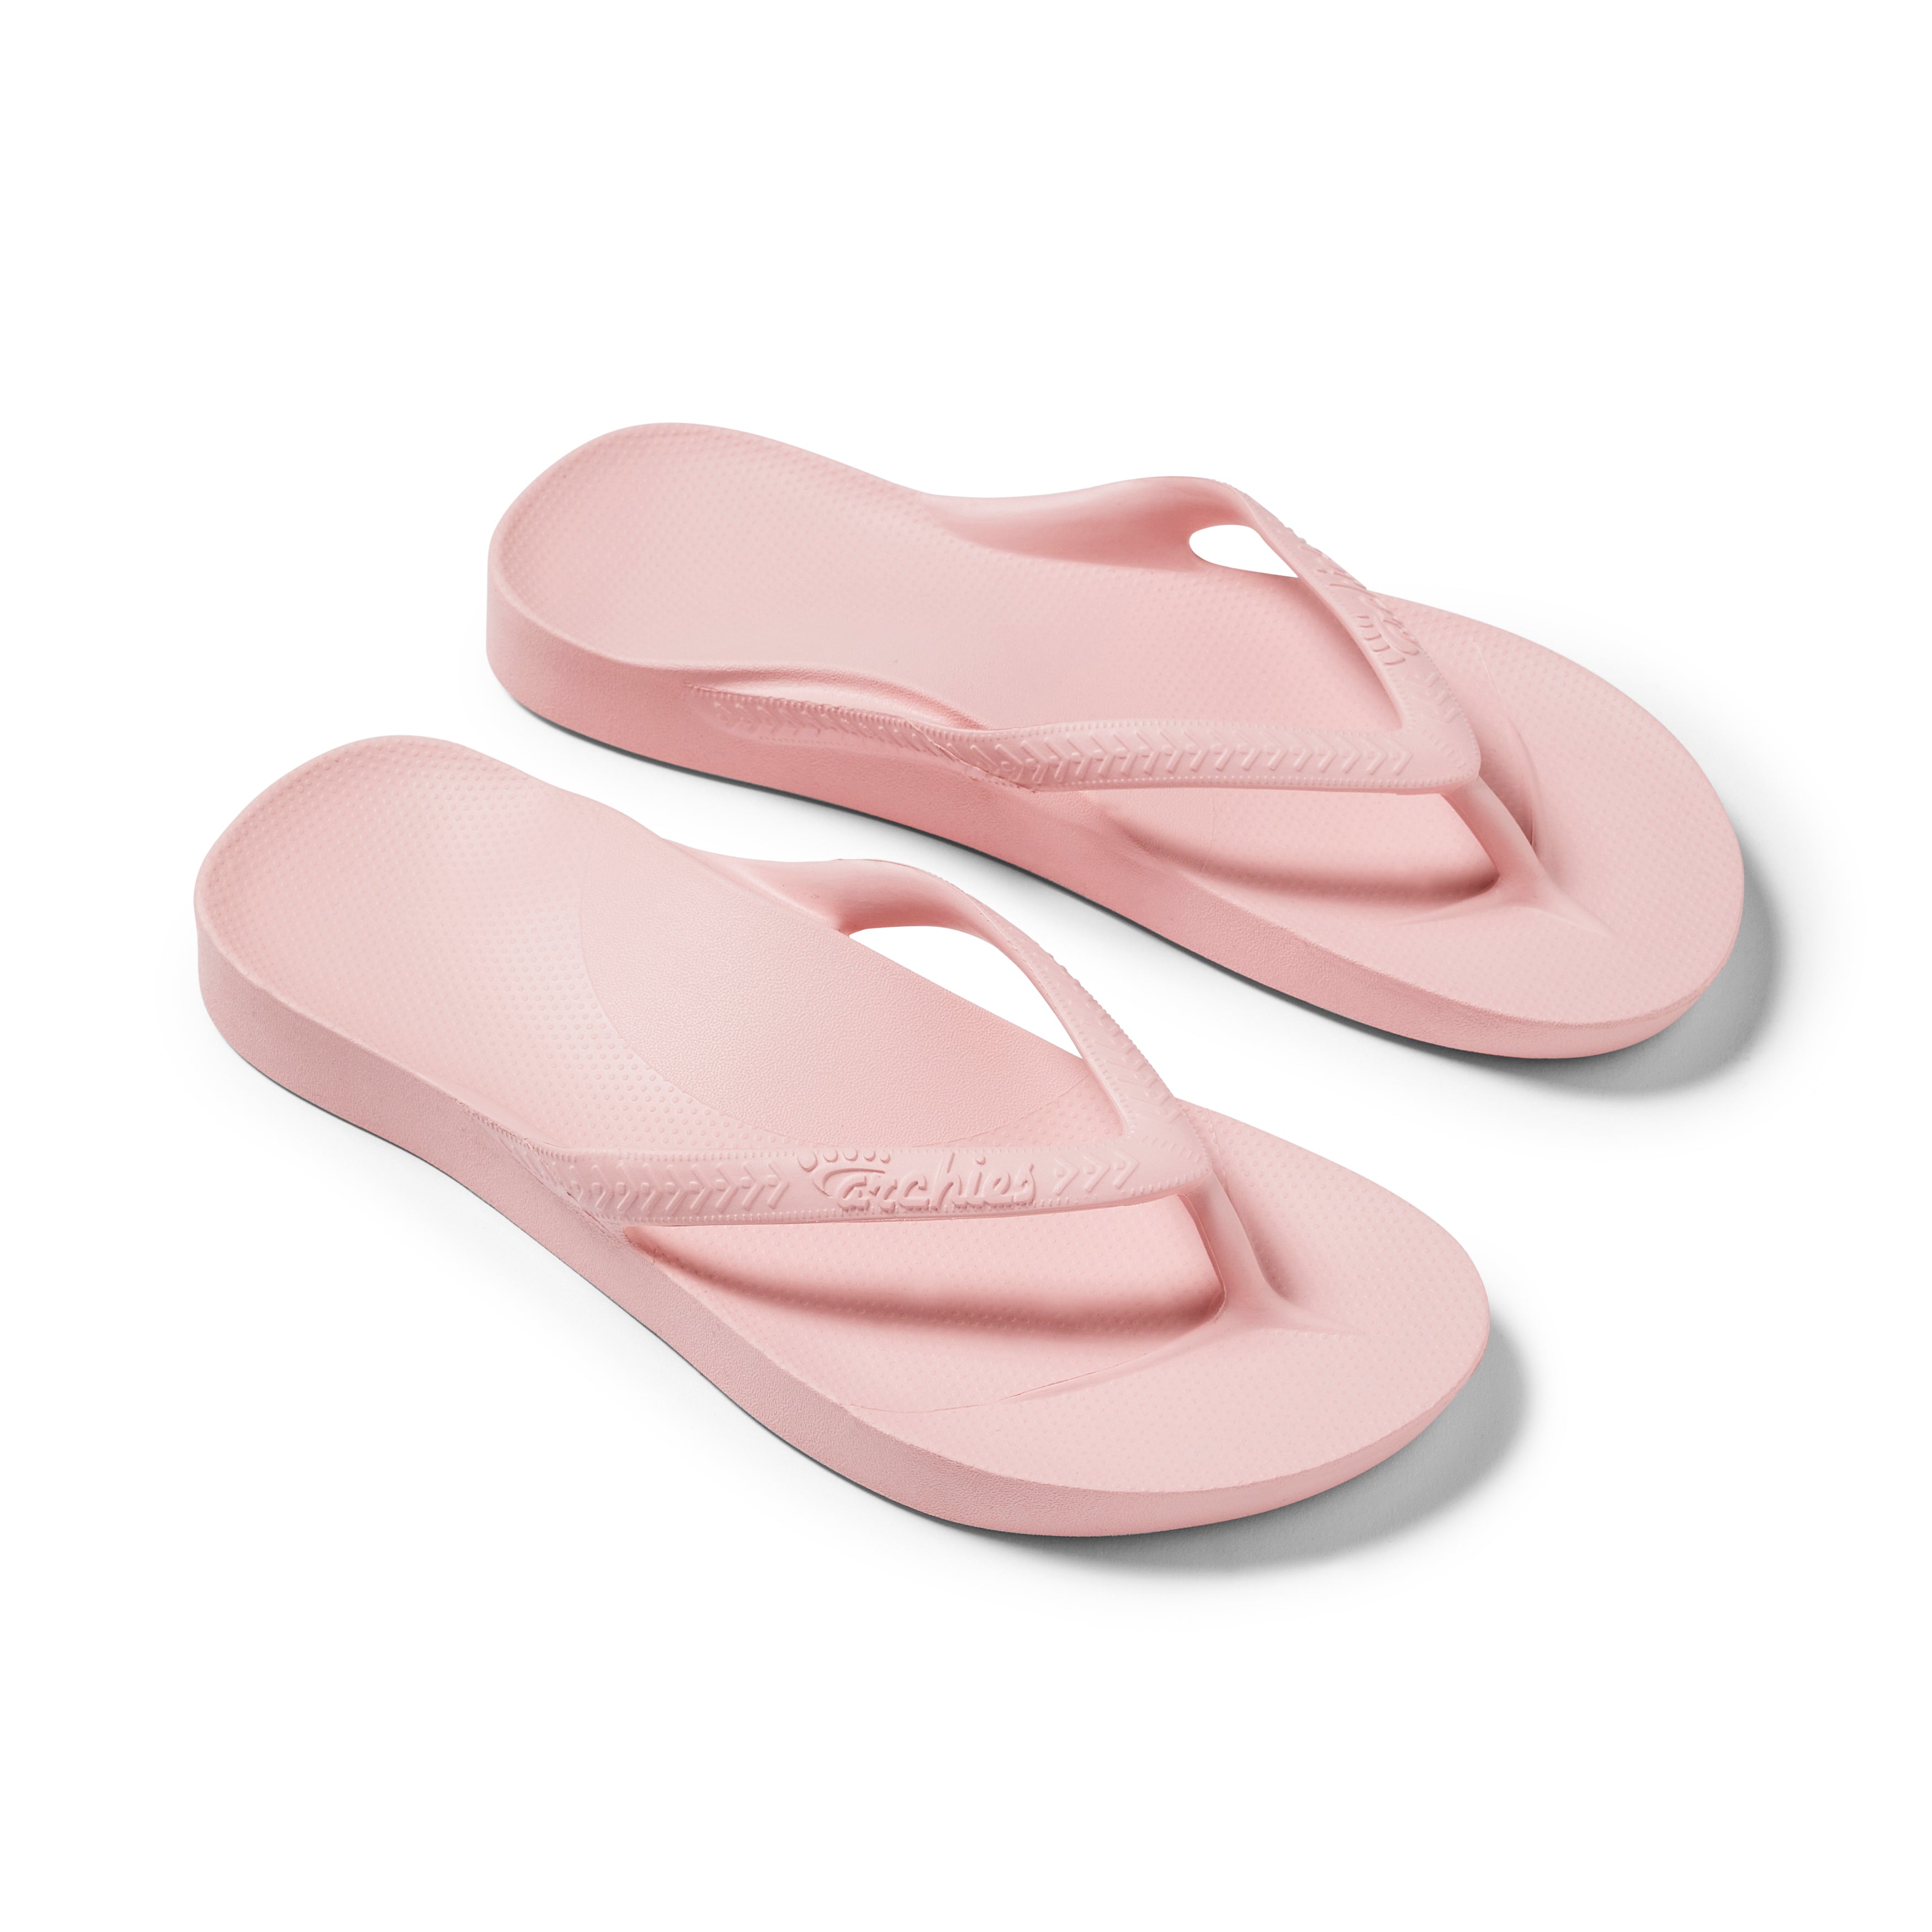 Archie's arch support flip flops Has Pink women's size 12